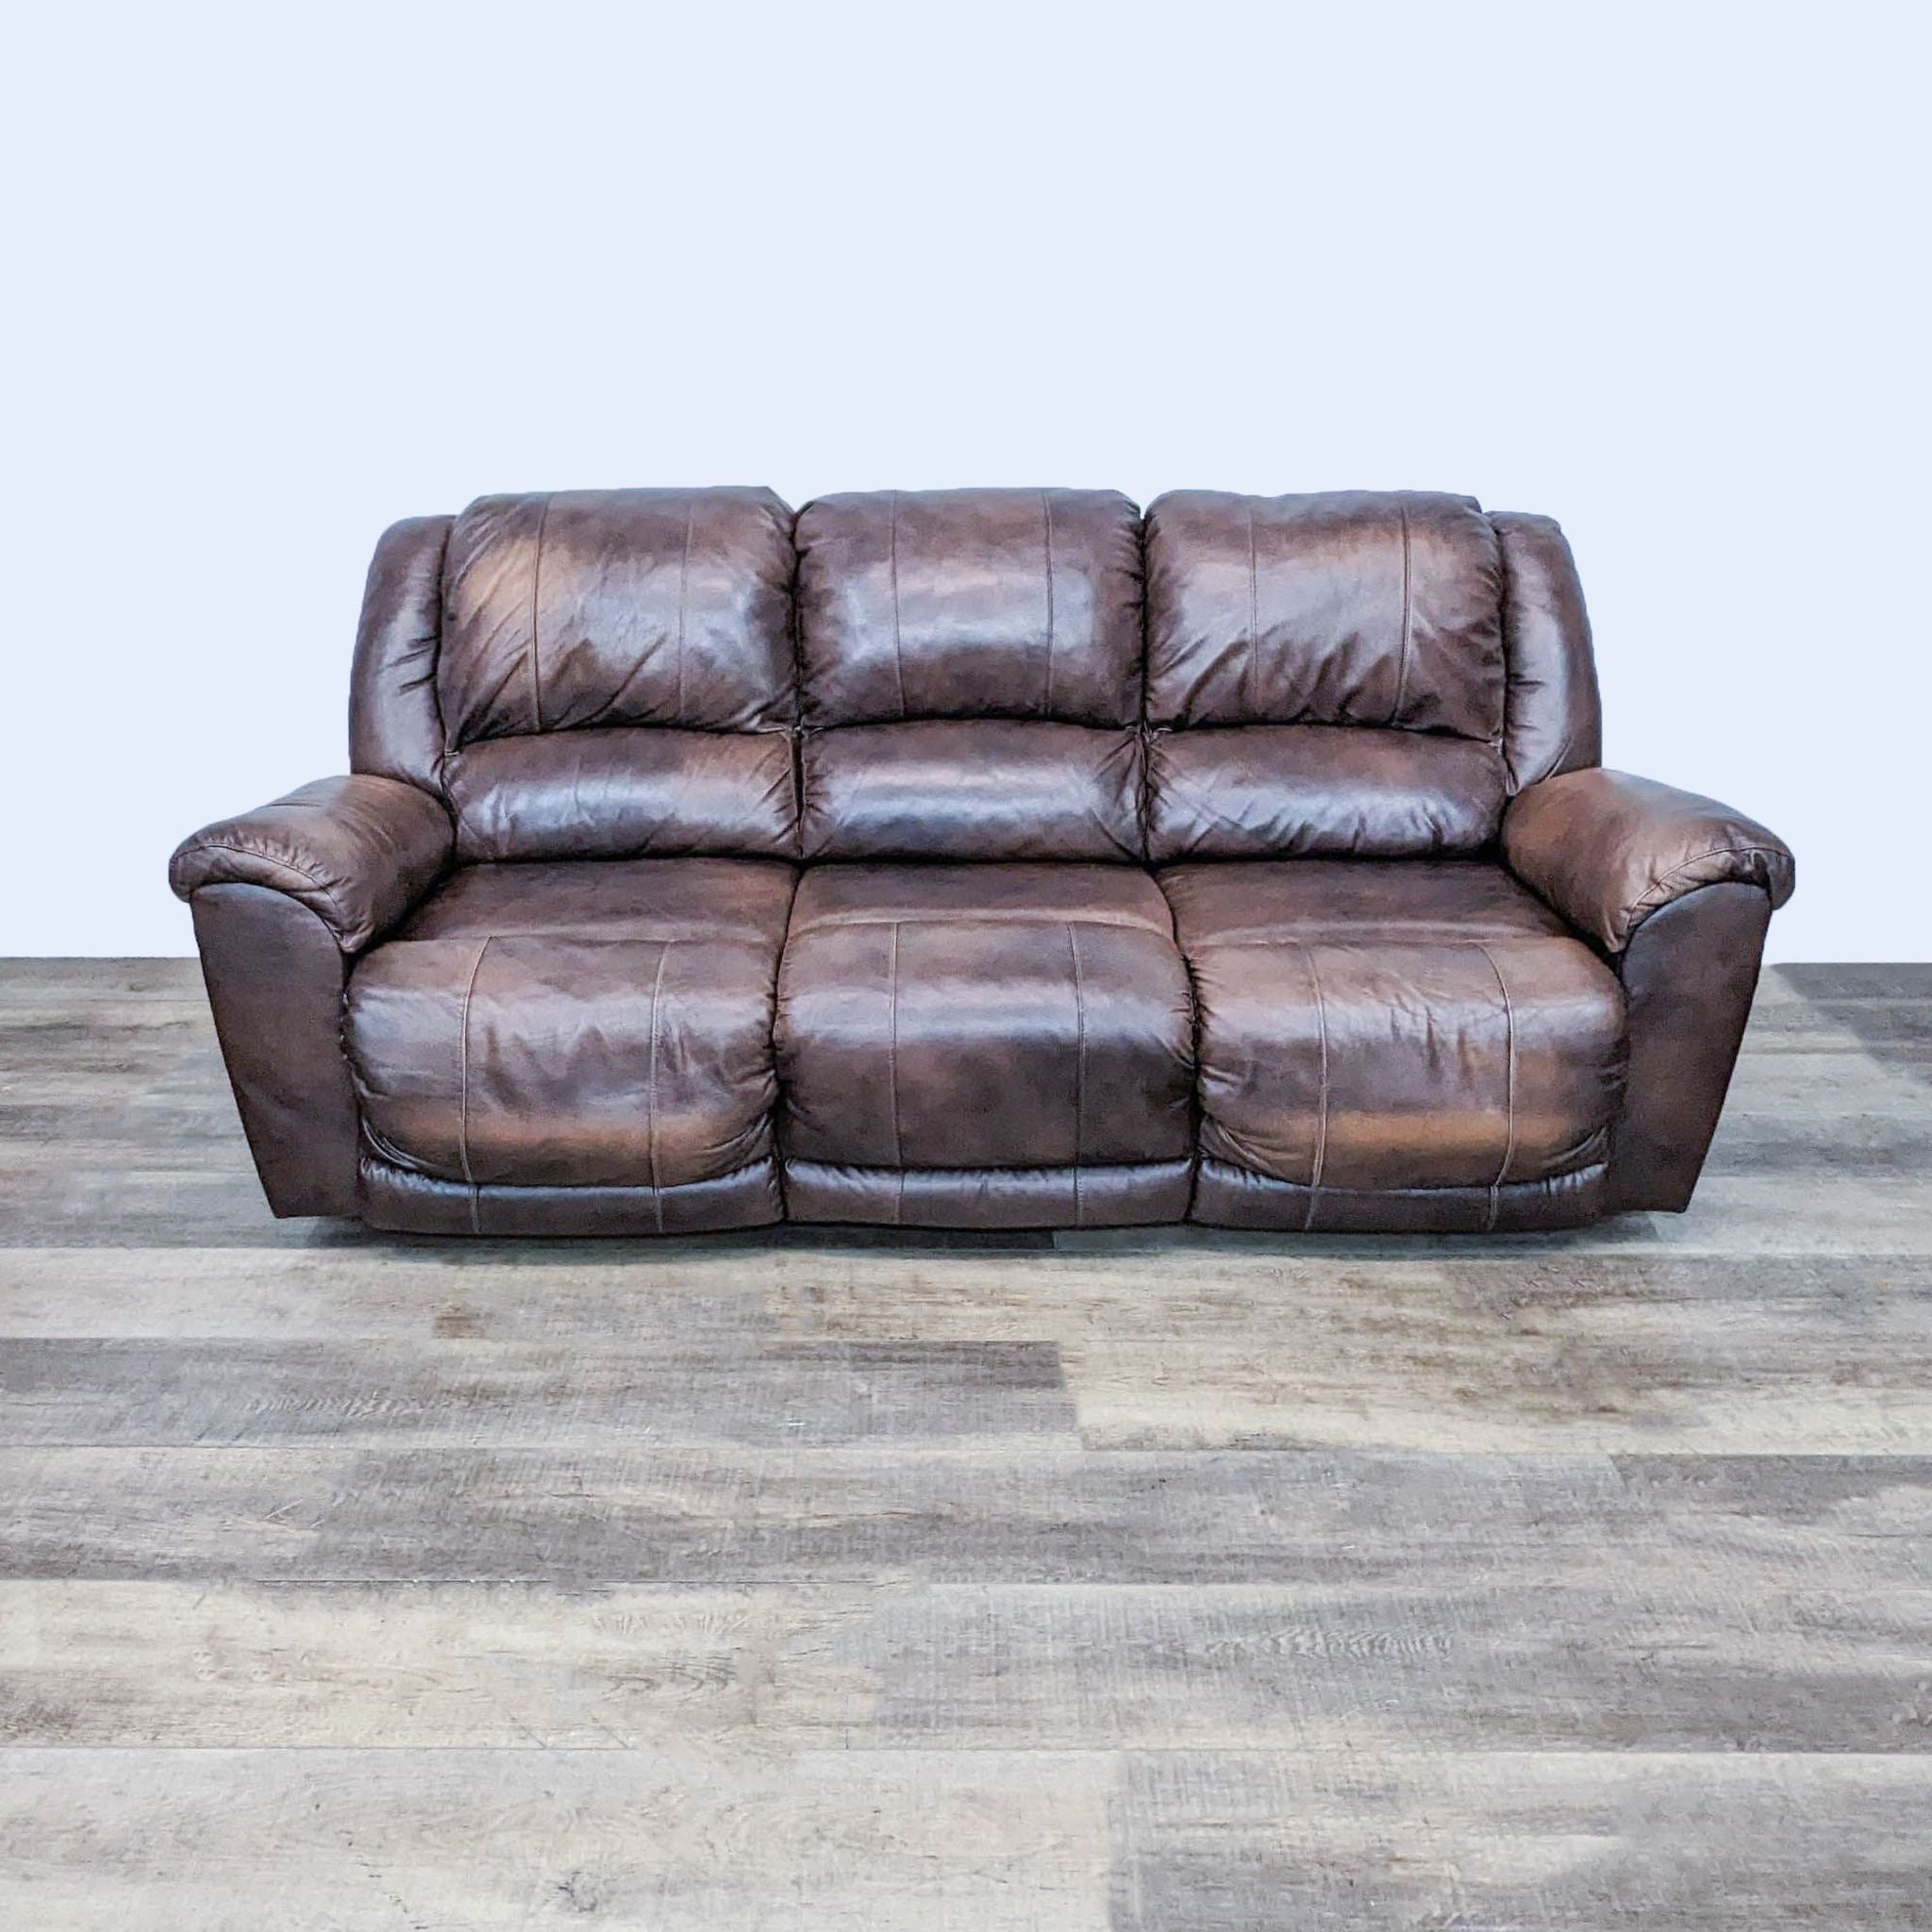 Ashley Furniture 3-seat brown leather recliner sofa with one seat extended, high backrest.